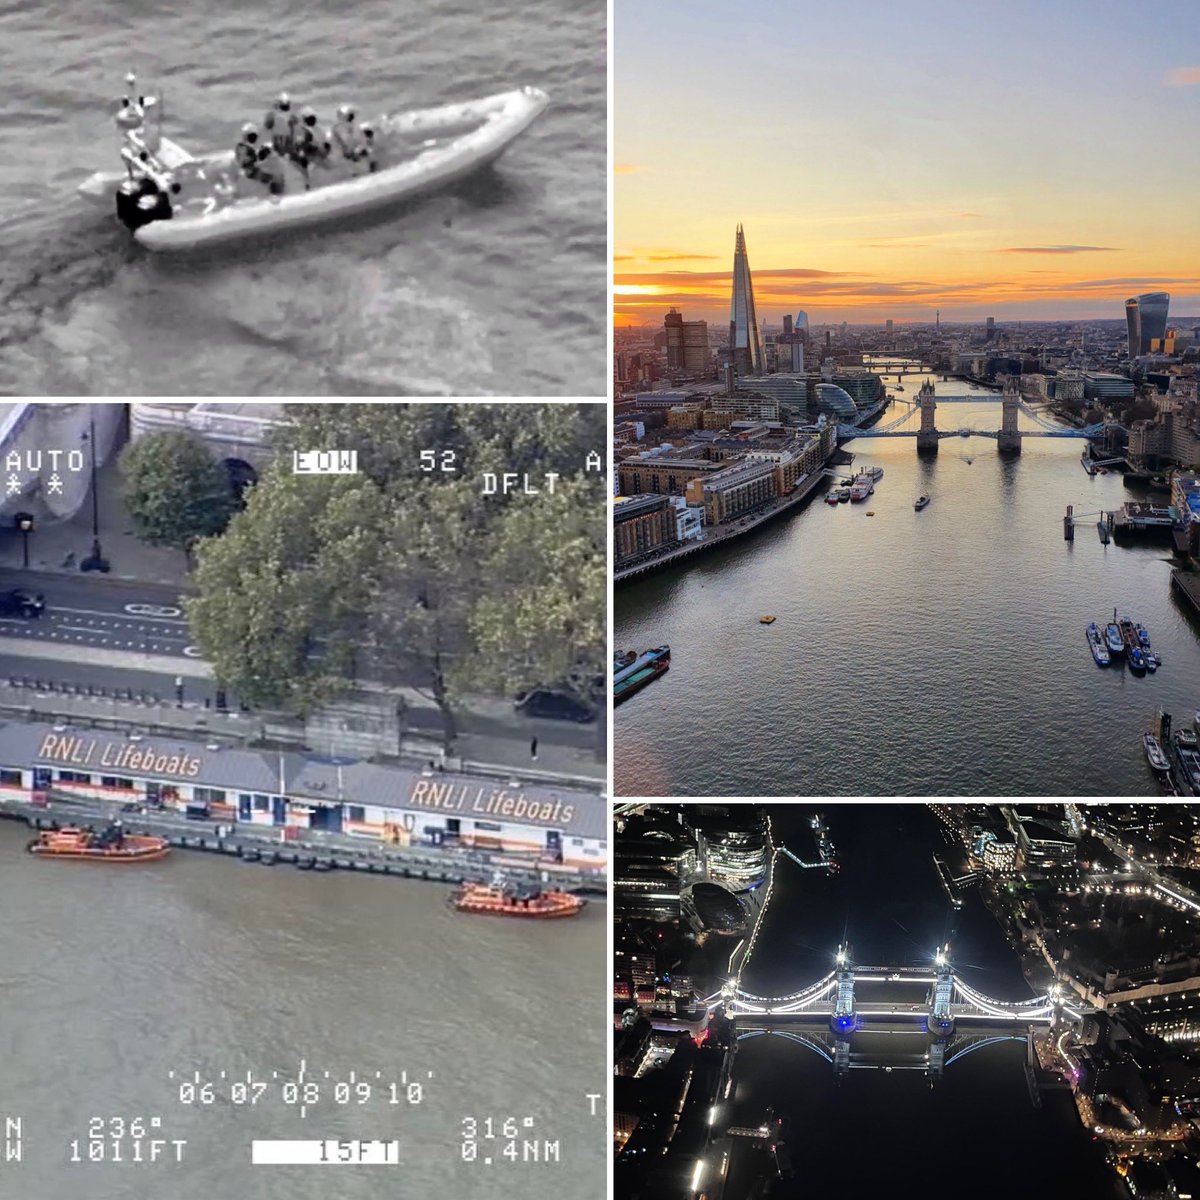 Today marks the 200 year anniversary of the heroes in yellow, saving lives on the water 💛 Congratulations to all of our @RNLI colleagues 👏👍 #RNLI200 @TowerRNLI @ChiswickRNLI @rnli_teddington @GravesendRNLI